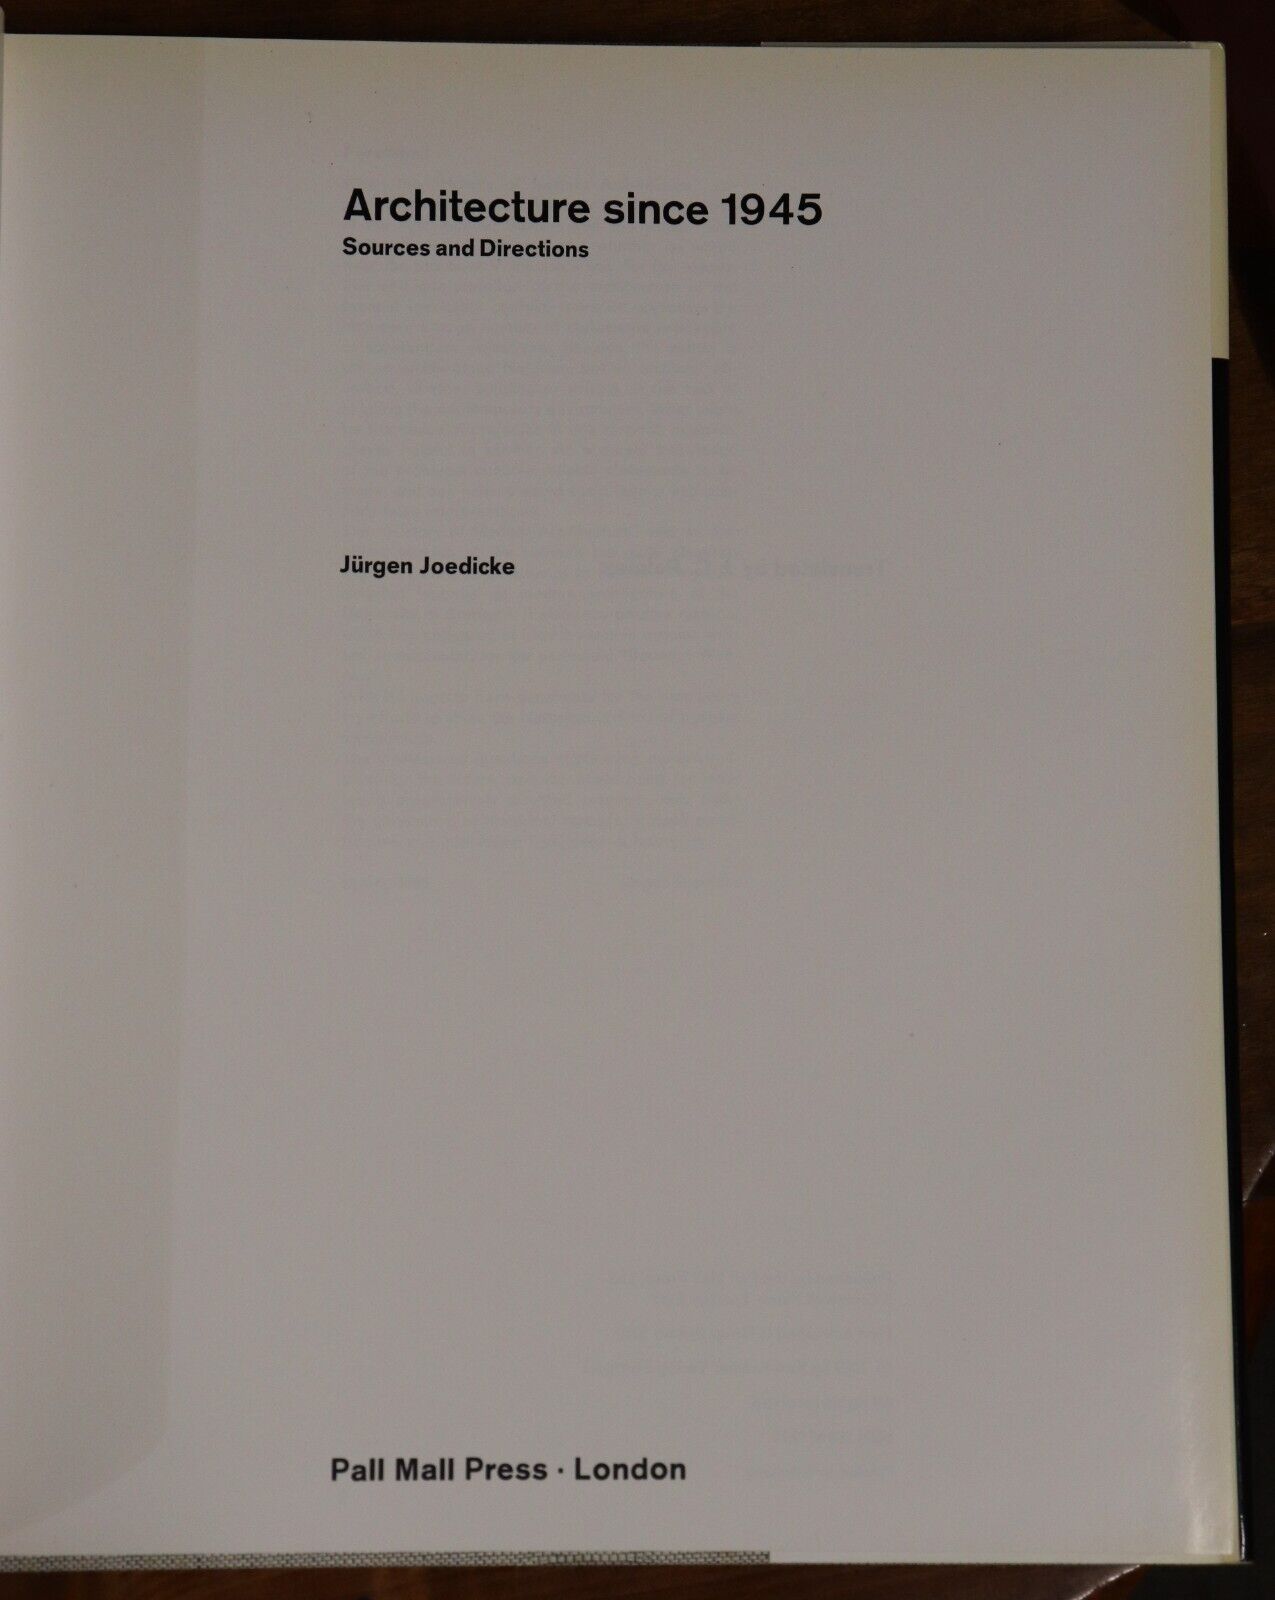 Architecture Since 1945 by Jurgen Joedicke - 1969 - Architectural History Book - 0